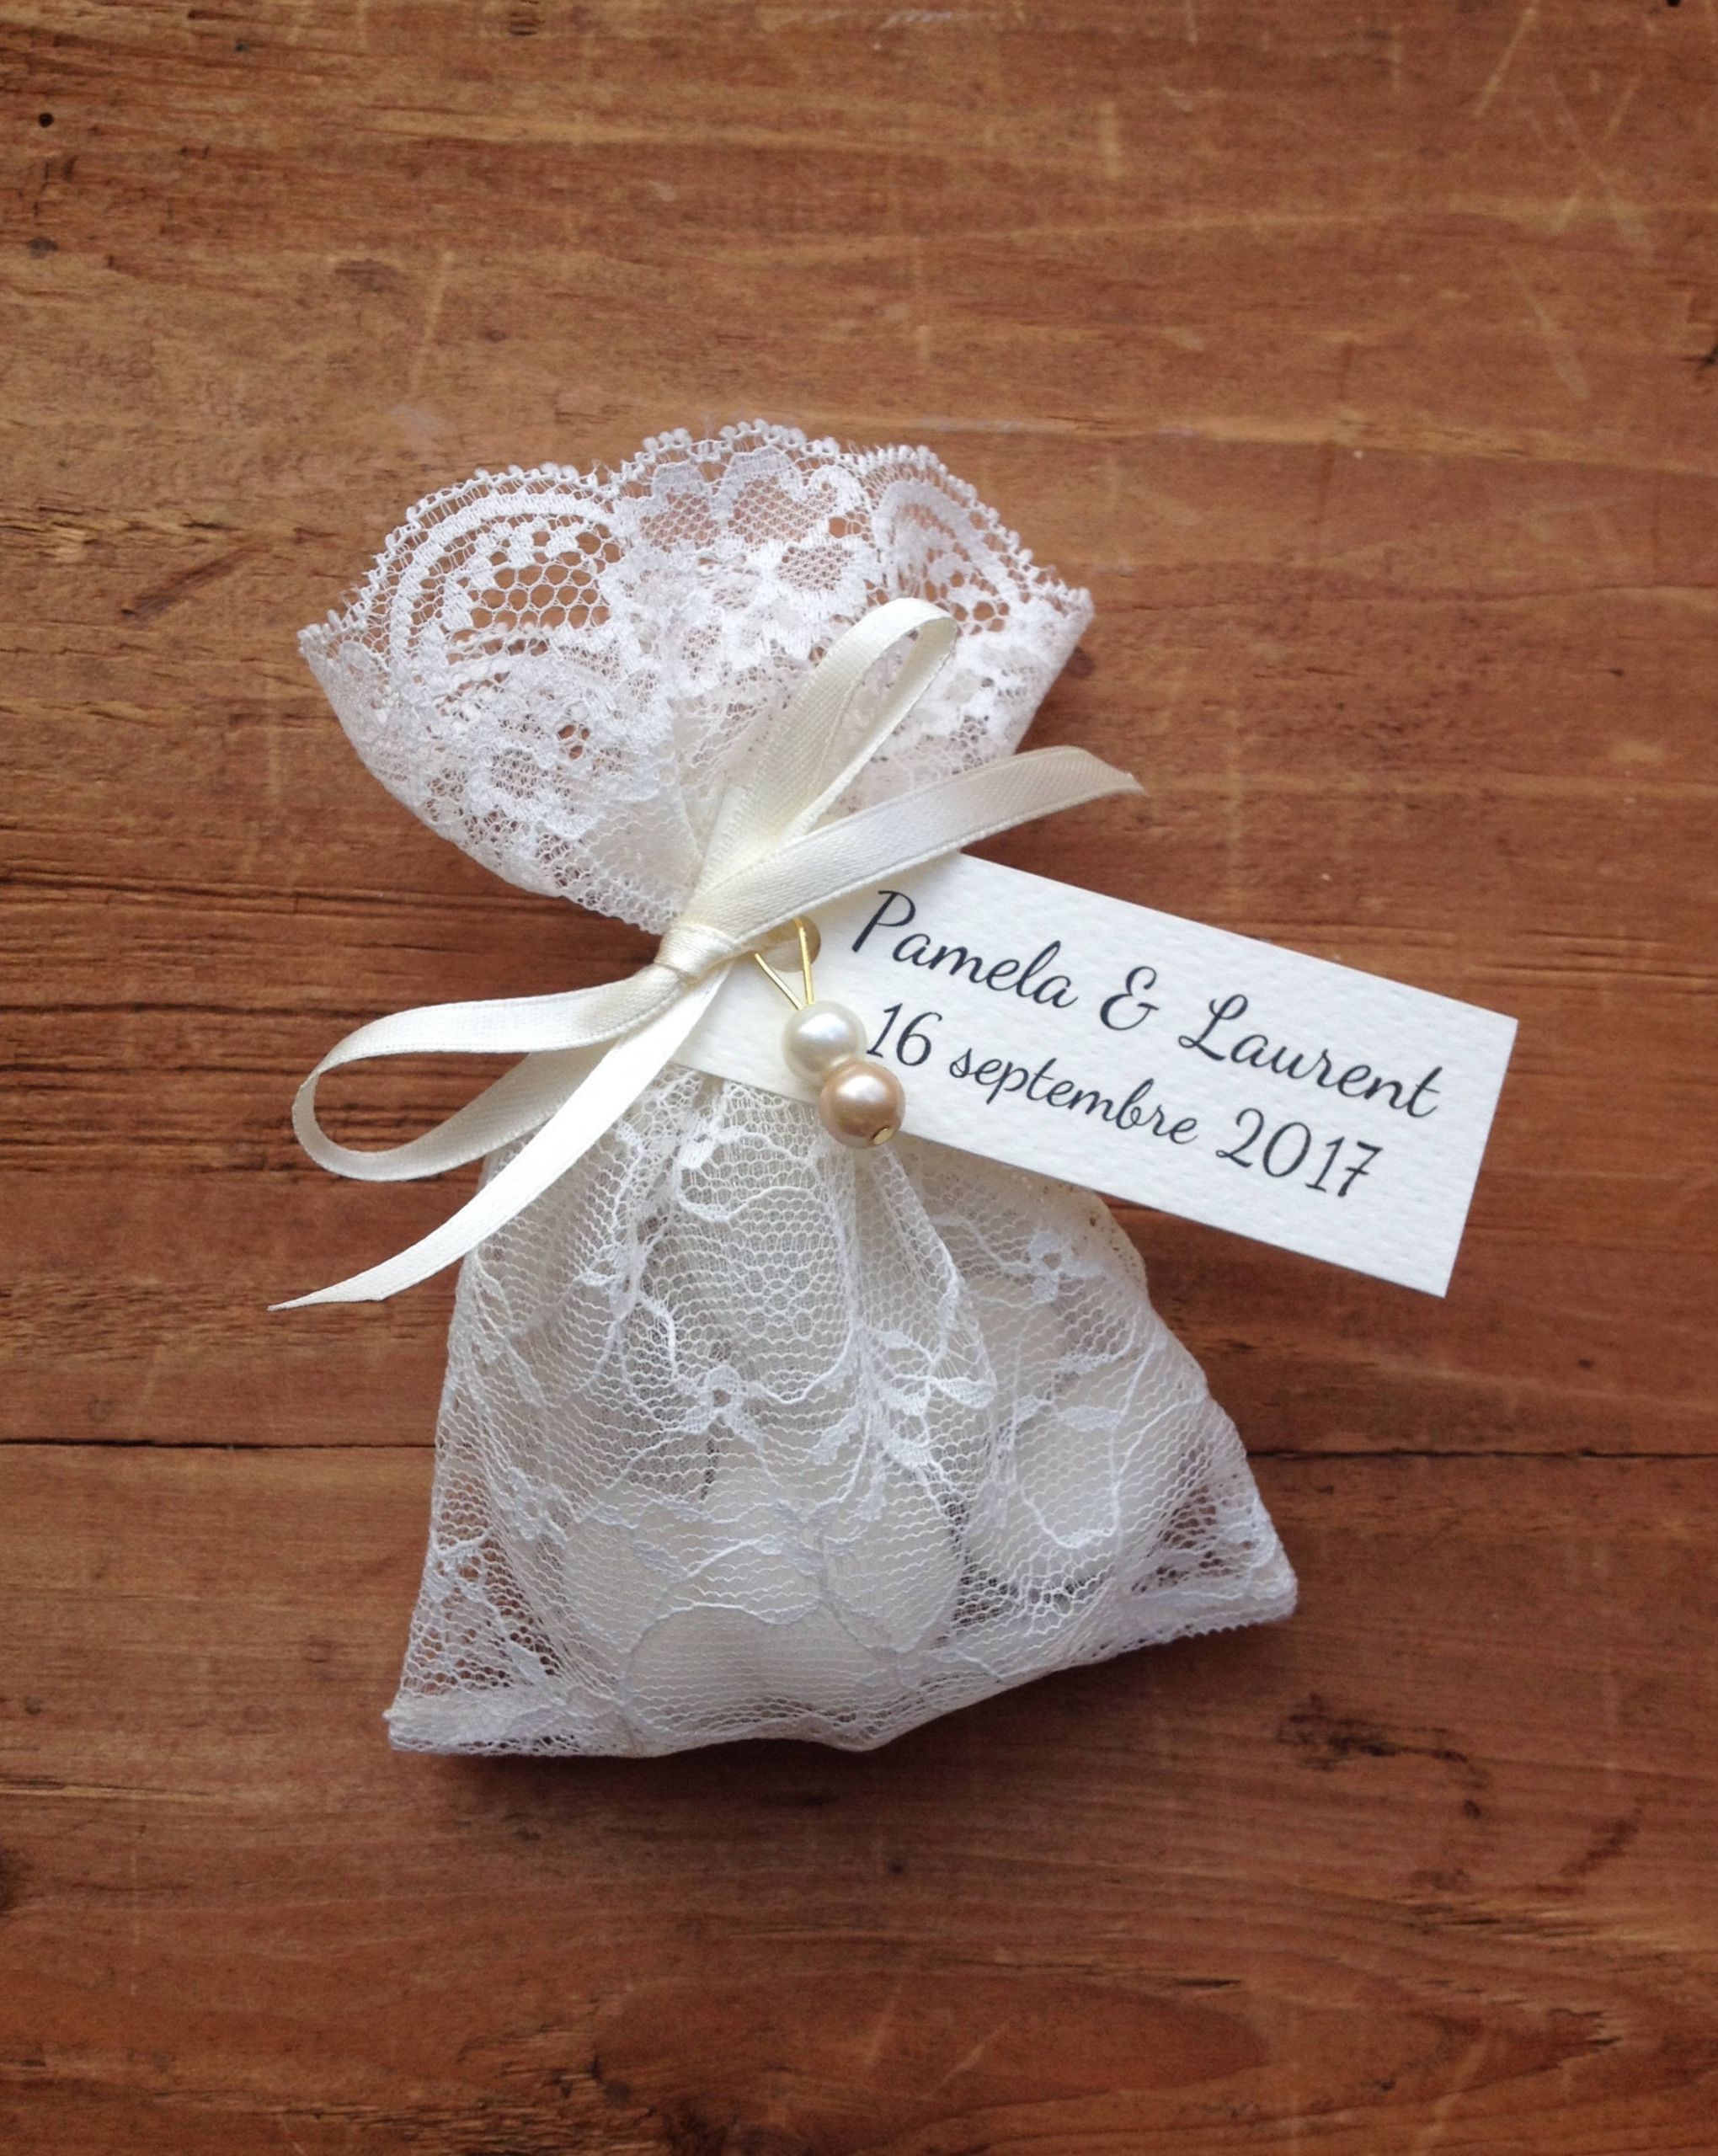 Italian Wedding Gifts
 lace favor bag italian wedding favors jewelry pouches